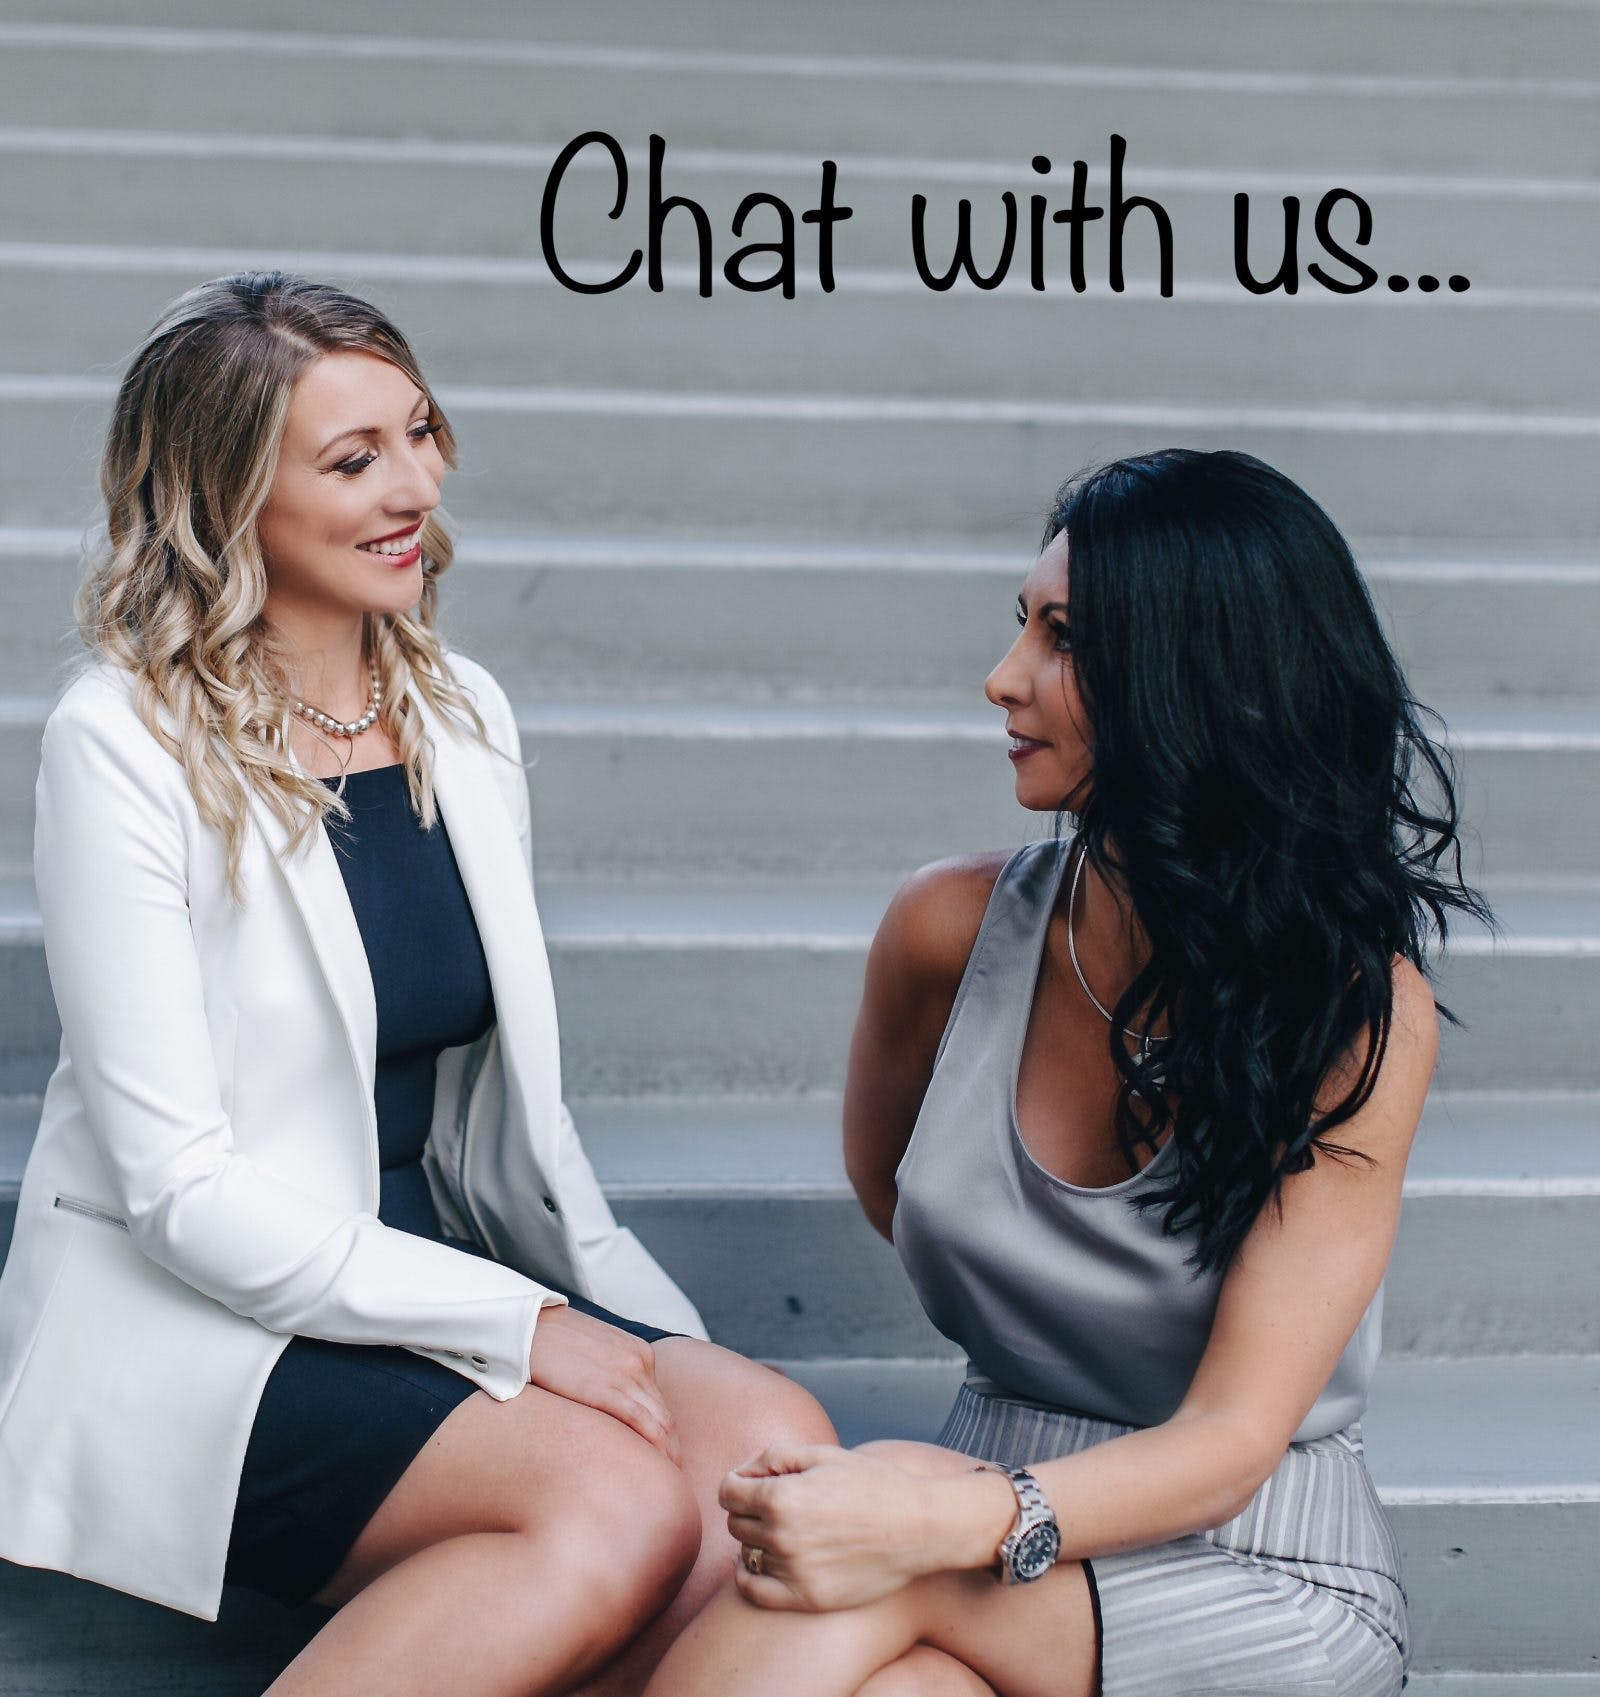 Buying a House, Calgary and Airdrie Realtors, The Beautiful Homes Team, Tammy Forrest and Shayna Nackoney Skauge